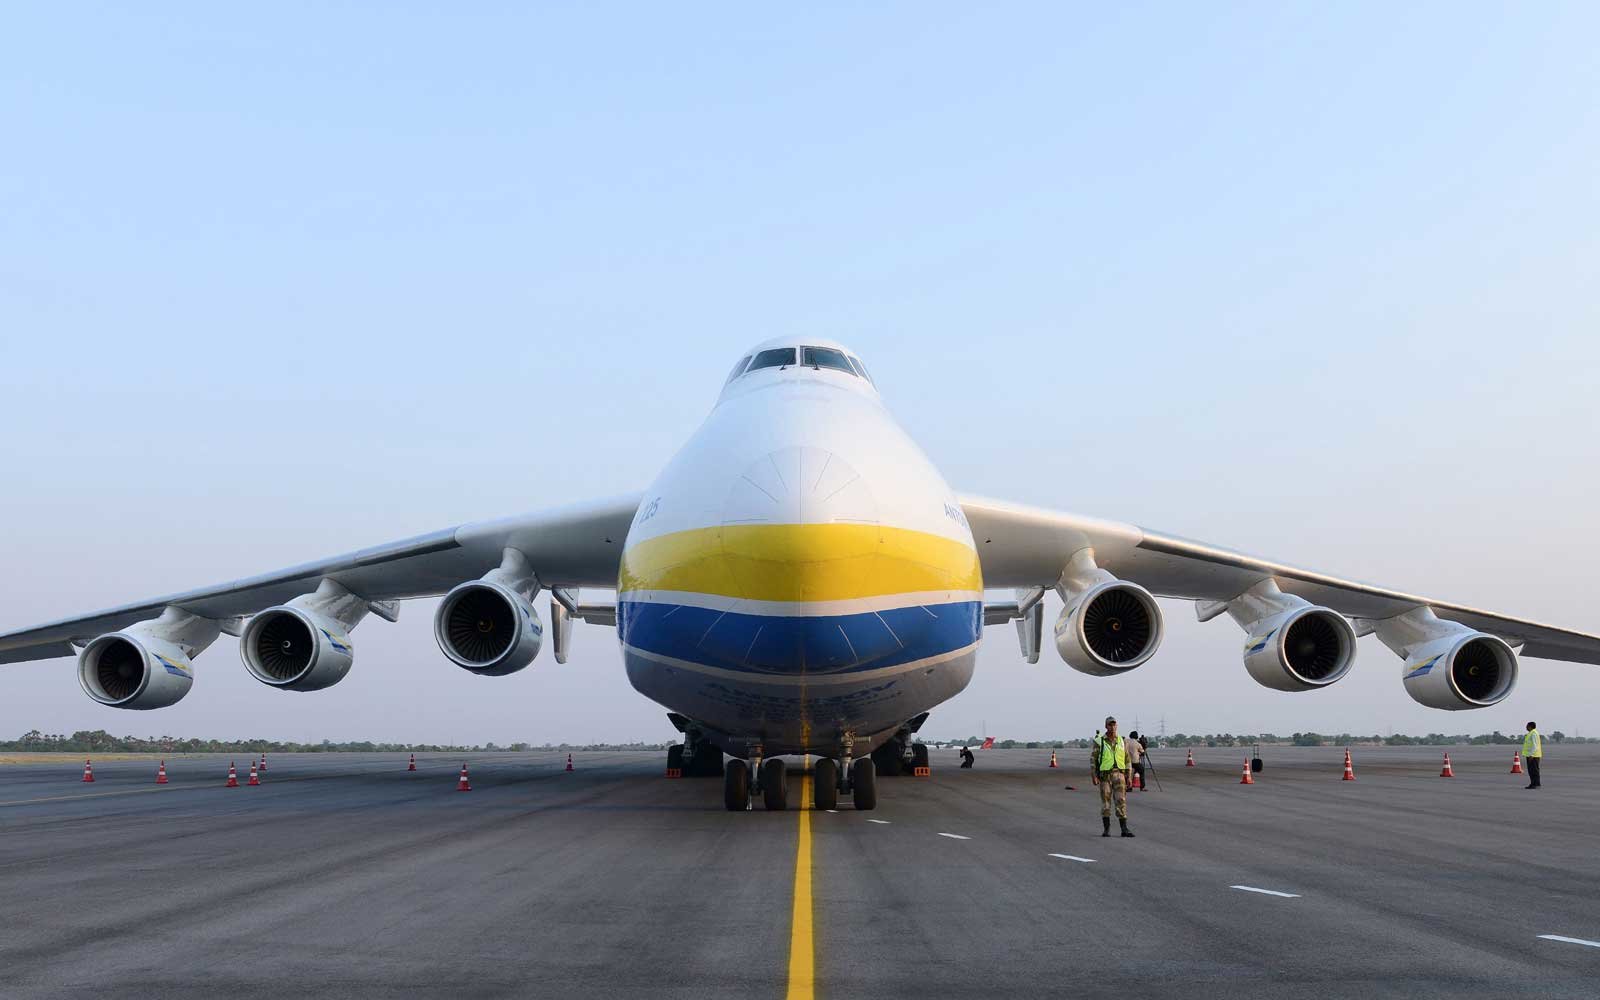 These Are The Top 5 Largest Planes In The World Today